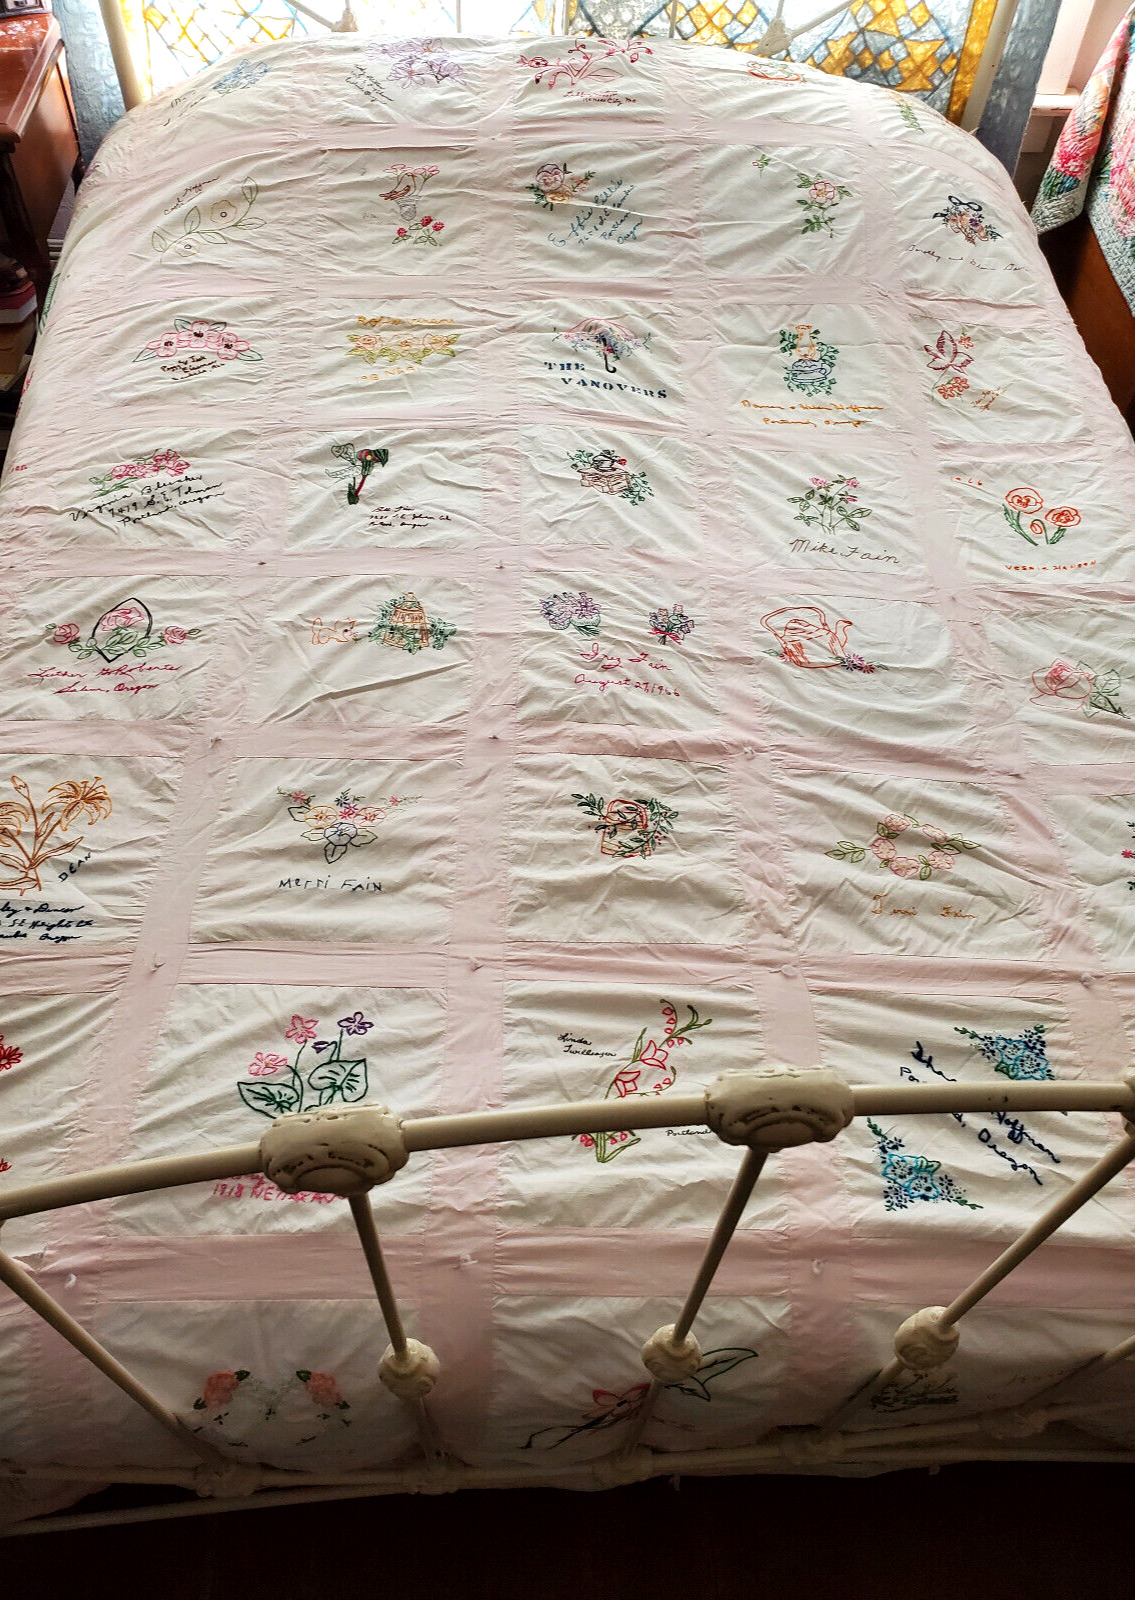 Vintage Autograph Embroidered Quilt 103 x 82 in  Oregon Addresses  Nice and Big